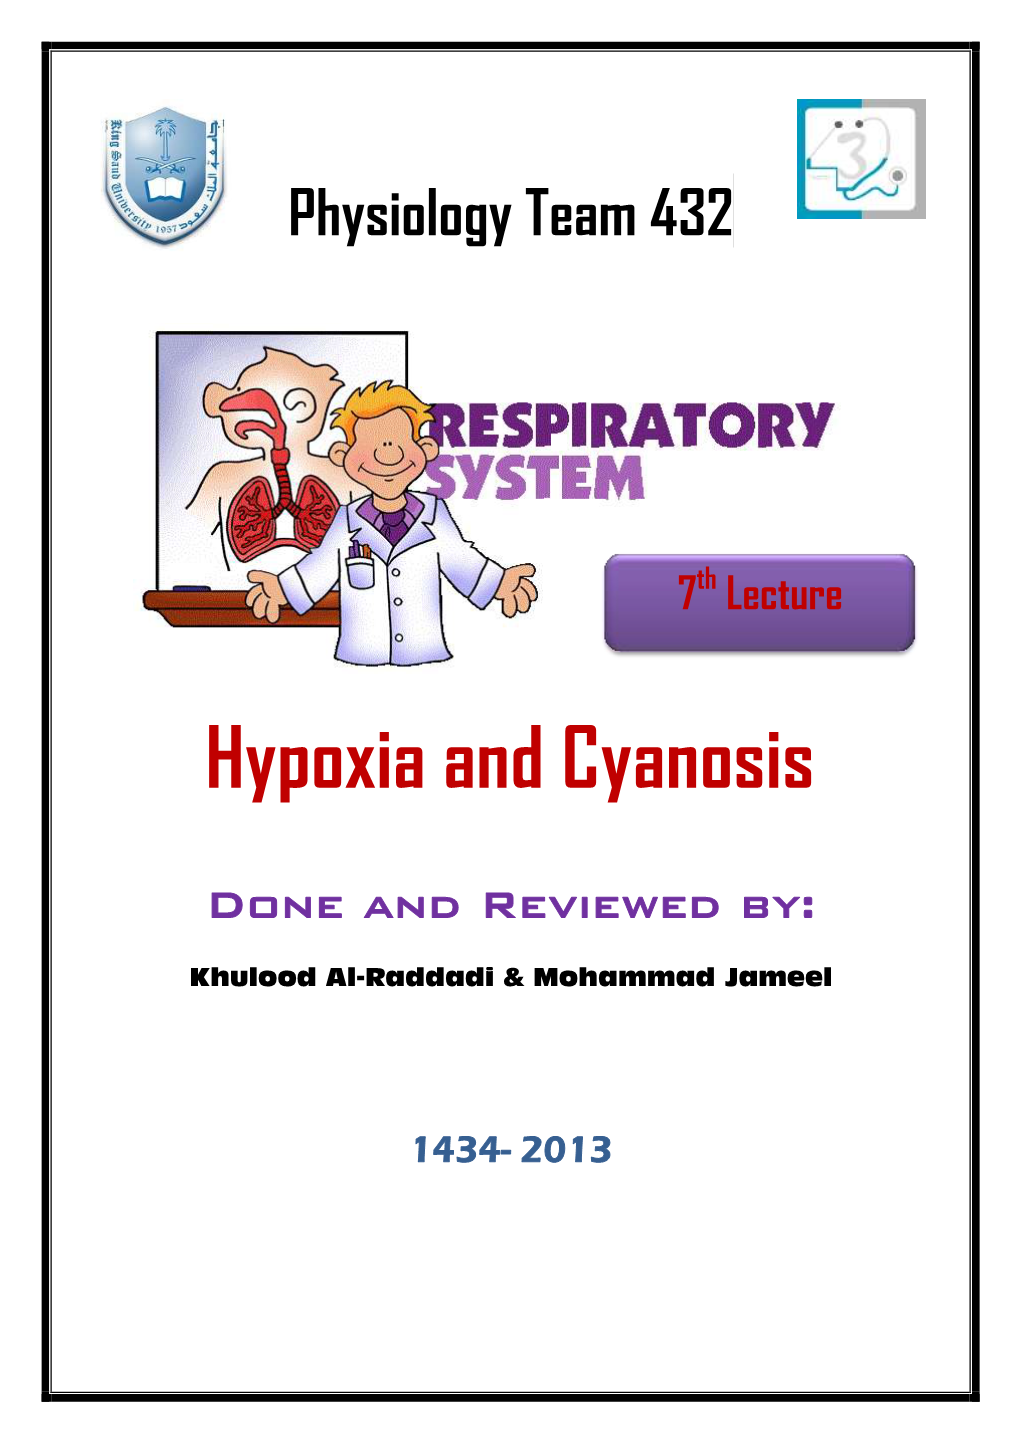 Hypoxia and Cyanosis